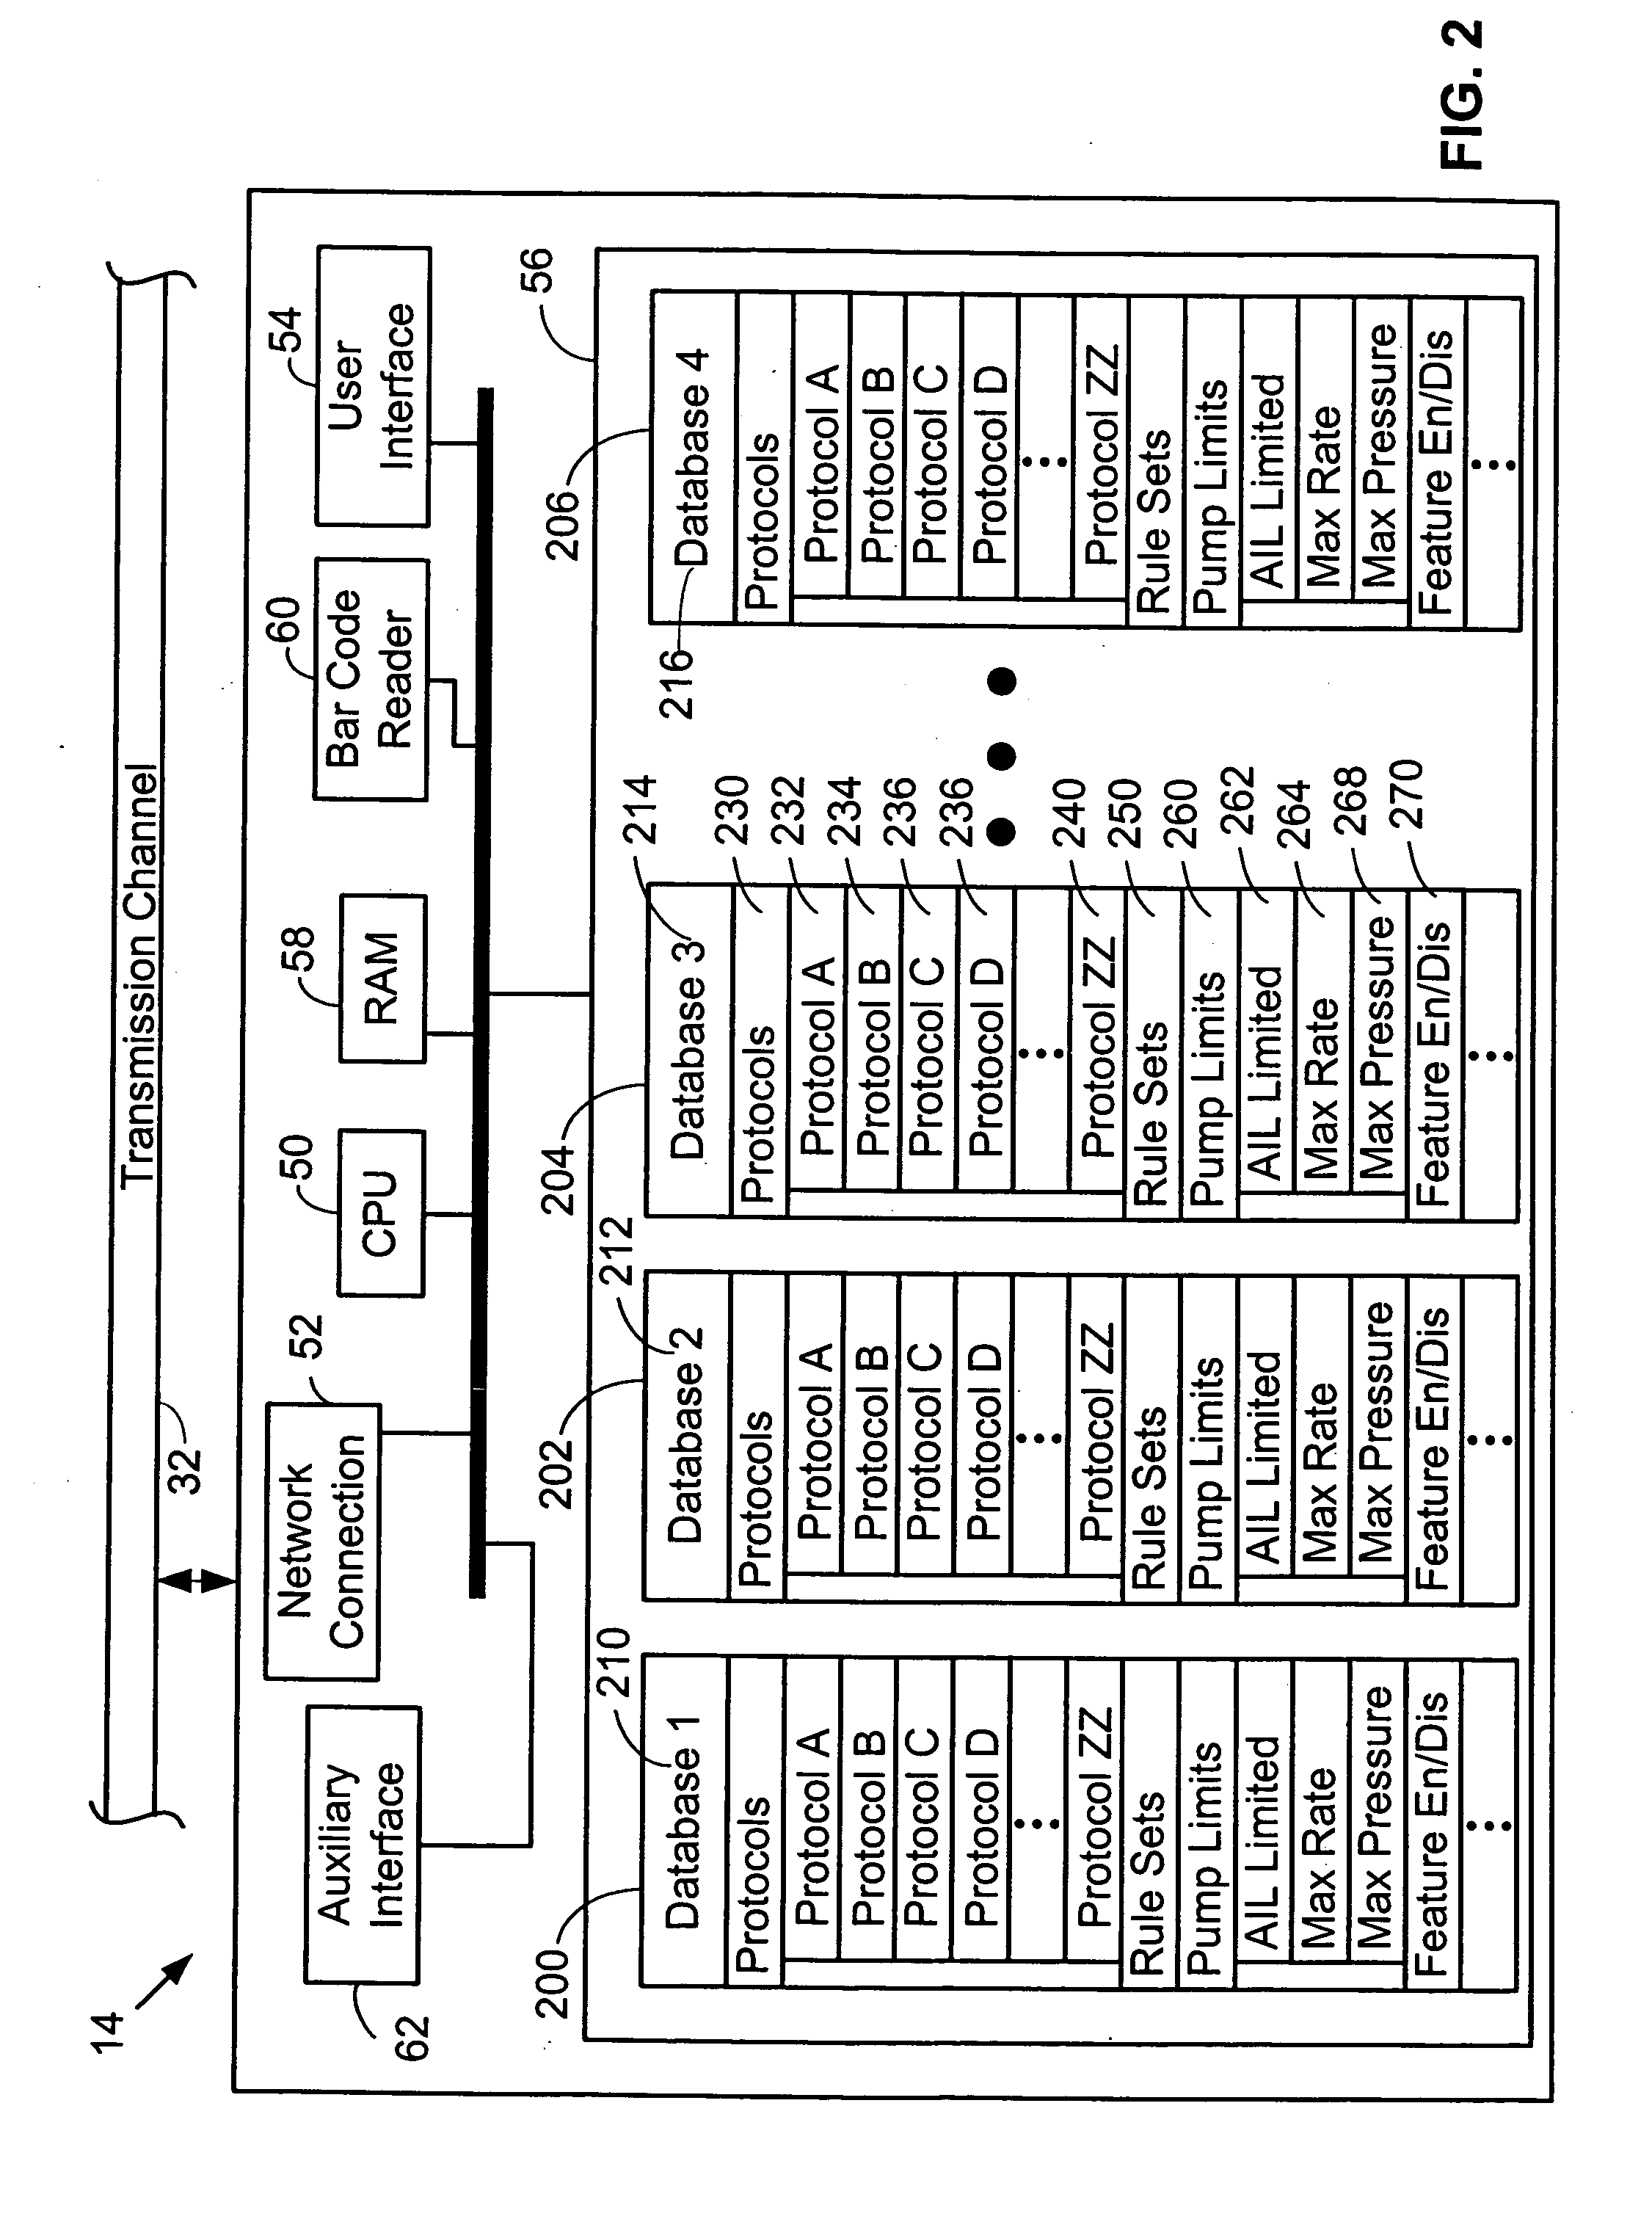 Method for programming a patient care device